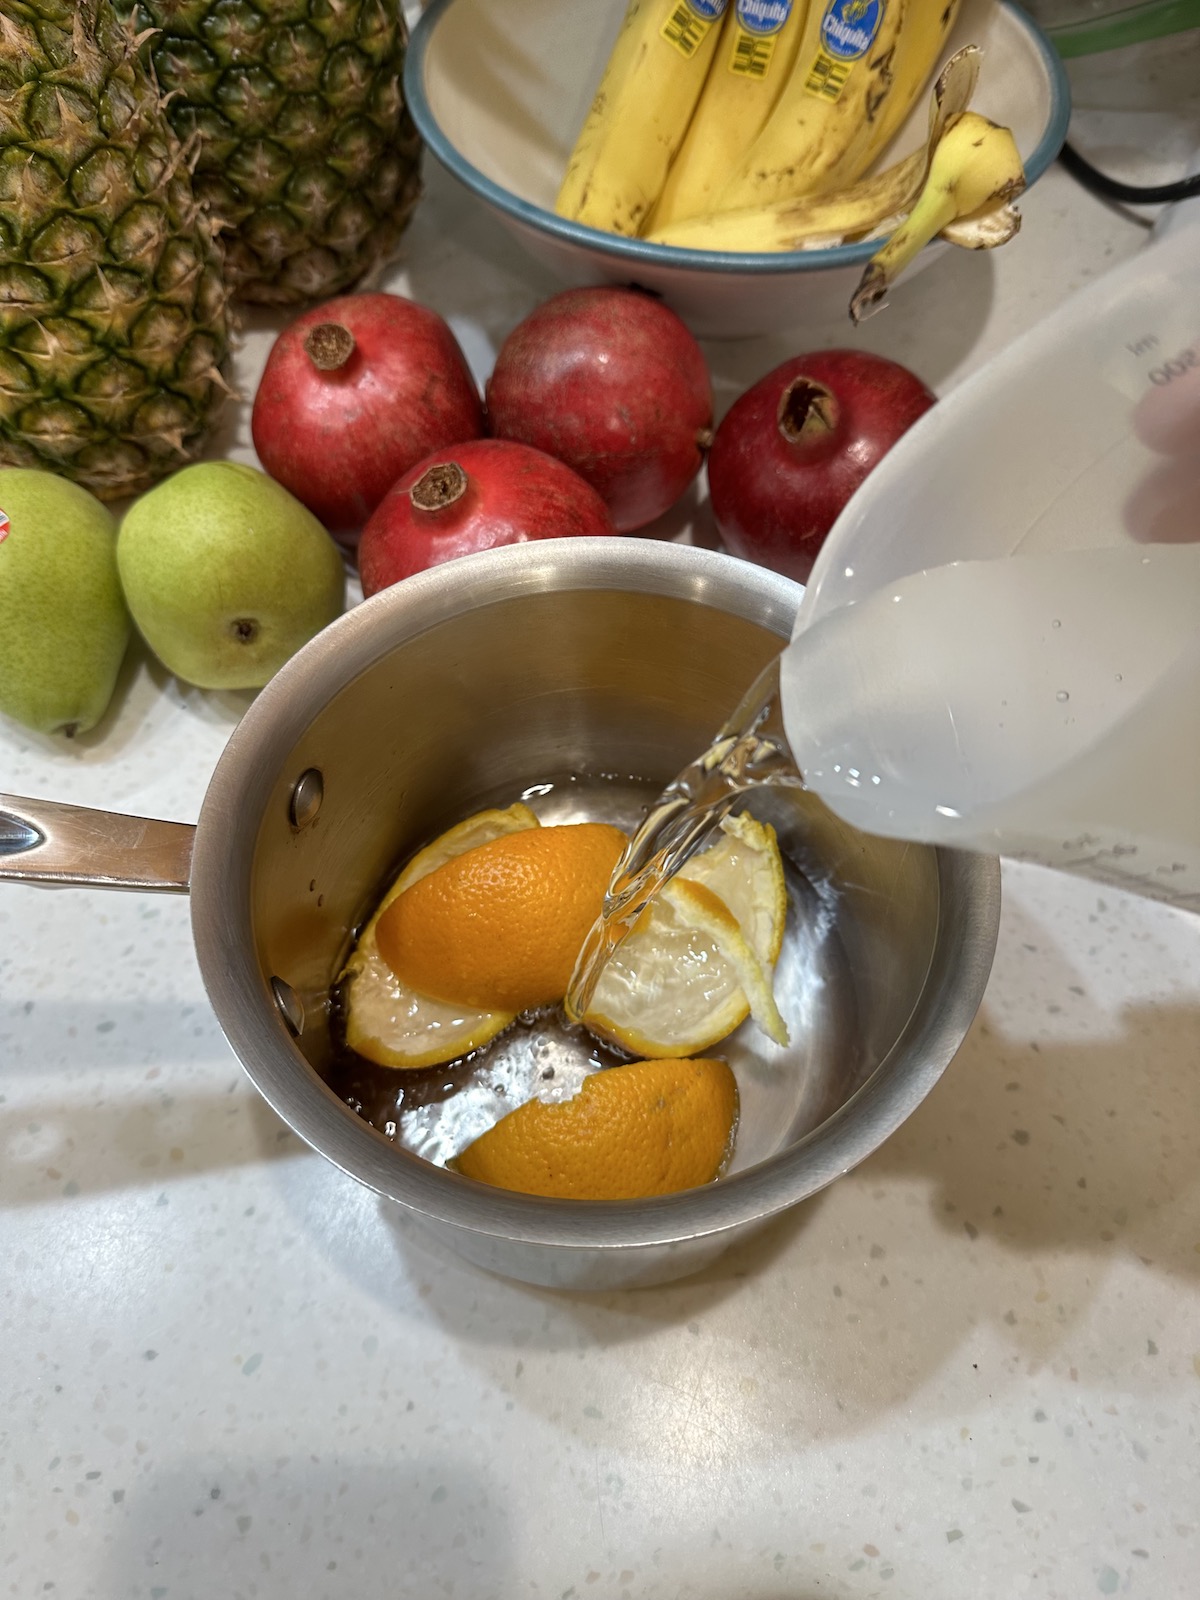 Orange peel in a small pot with water being poured in. Pomegranates, pears, pineapple and bananas in the background.